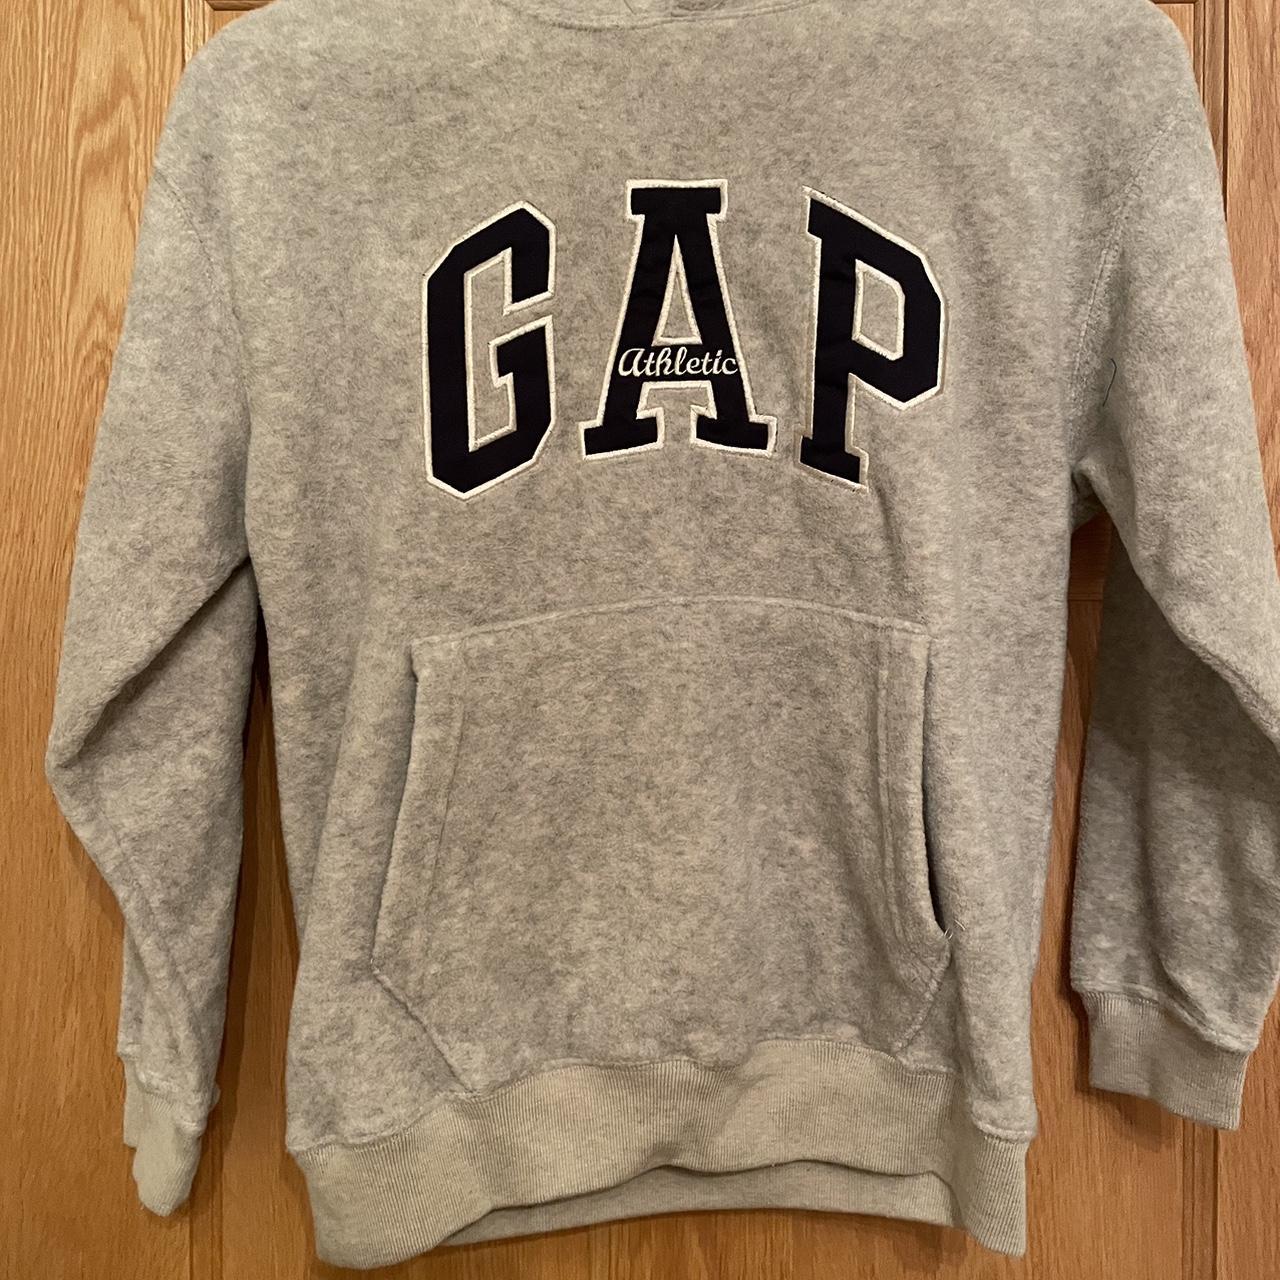 Kids x large gap grey hoody, brand new with tags - Depop